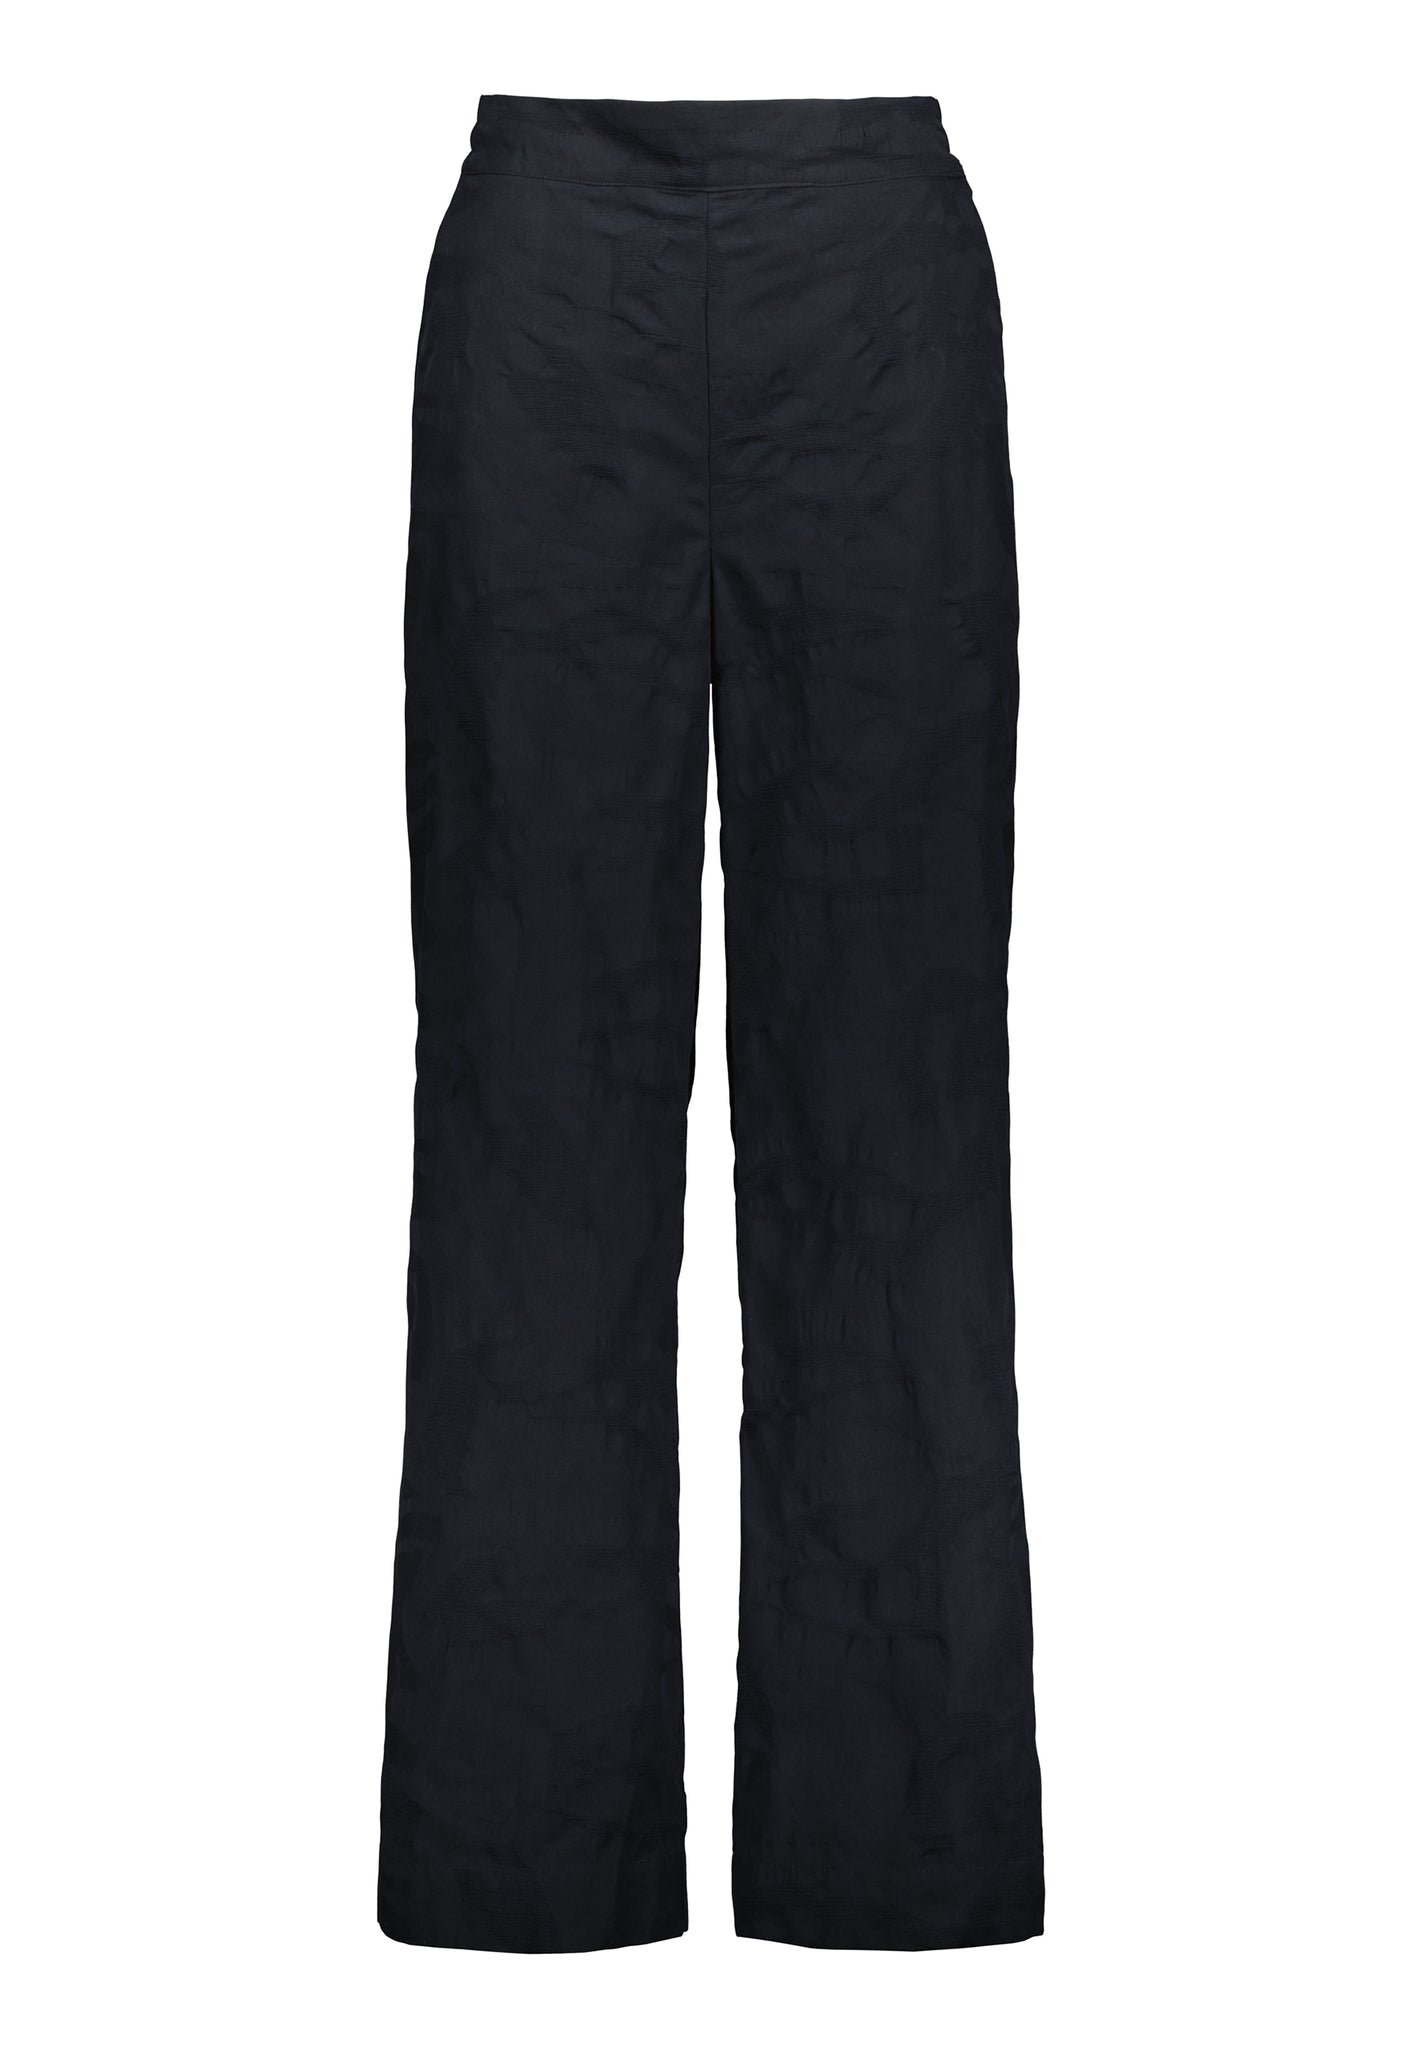 SCRIPPS LOOSE FIT PANTS -  Midnight blue punched cotton